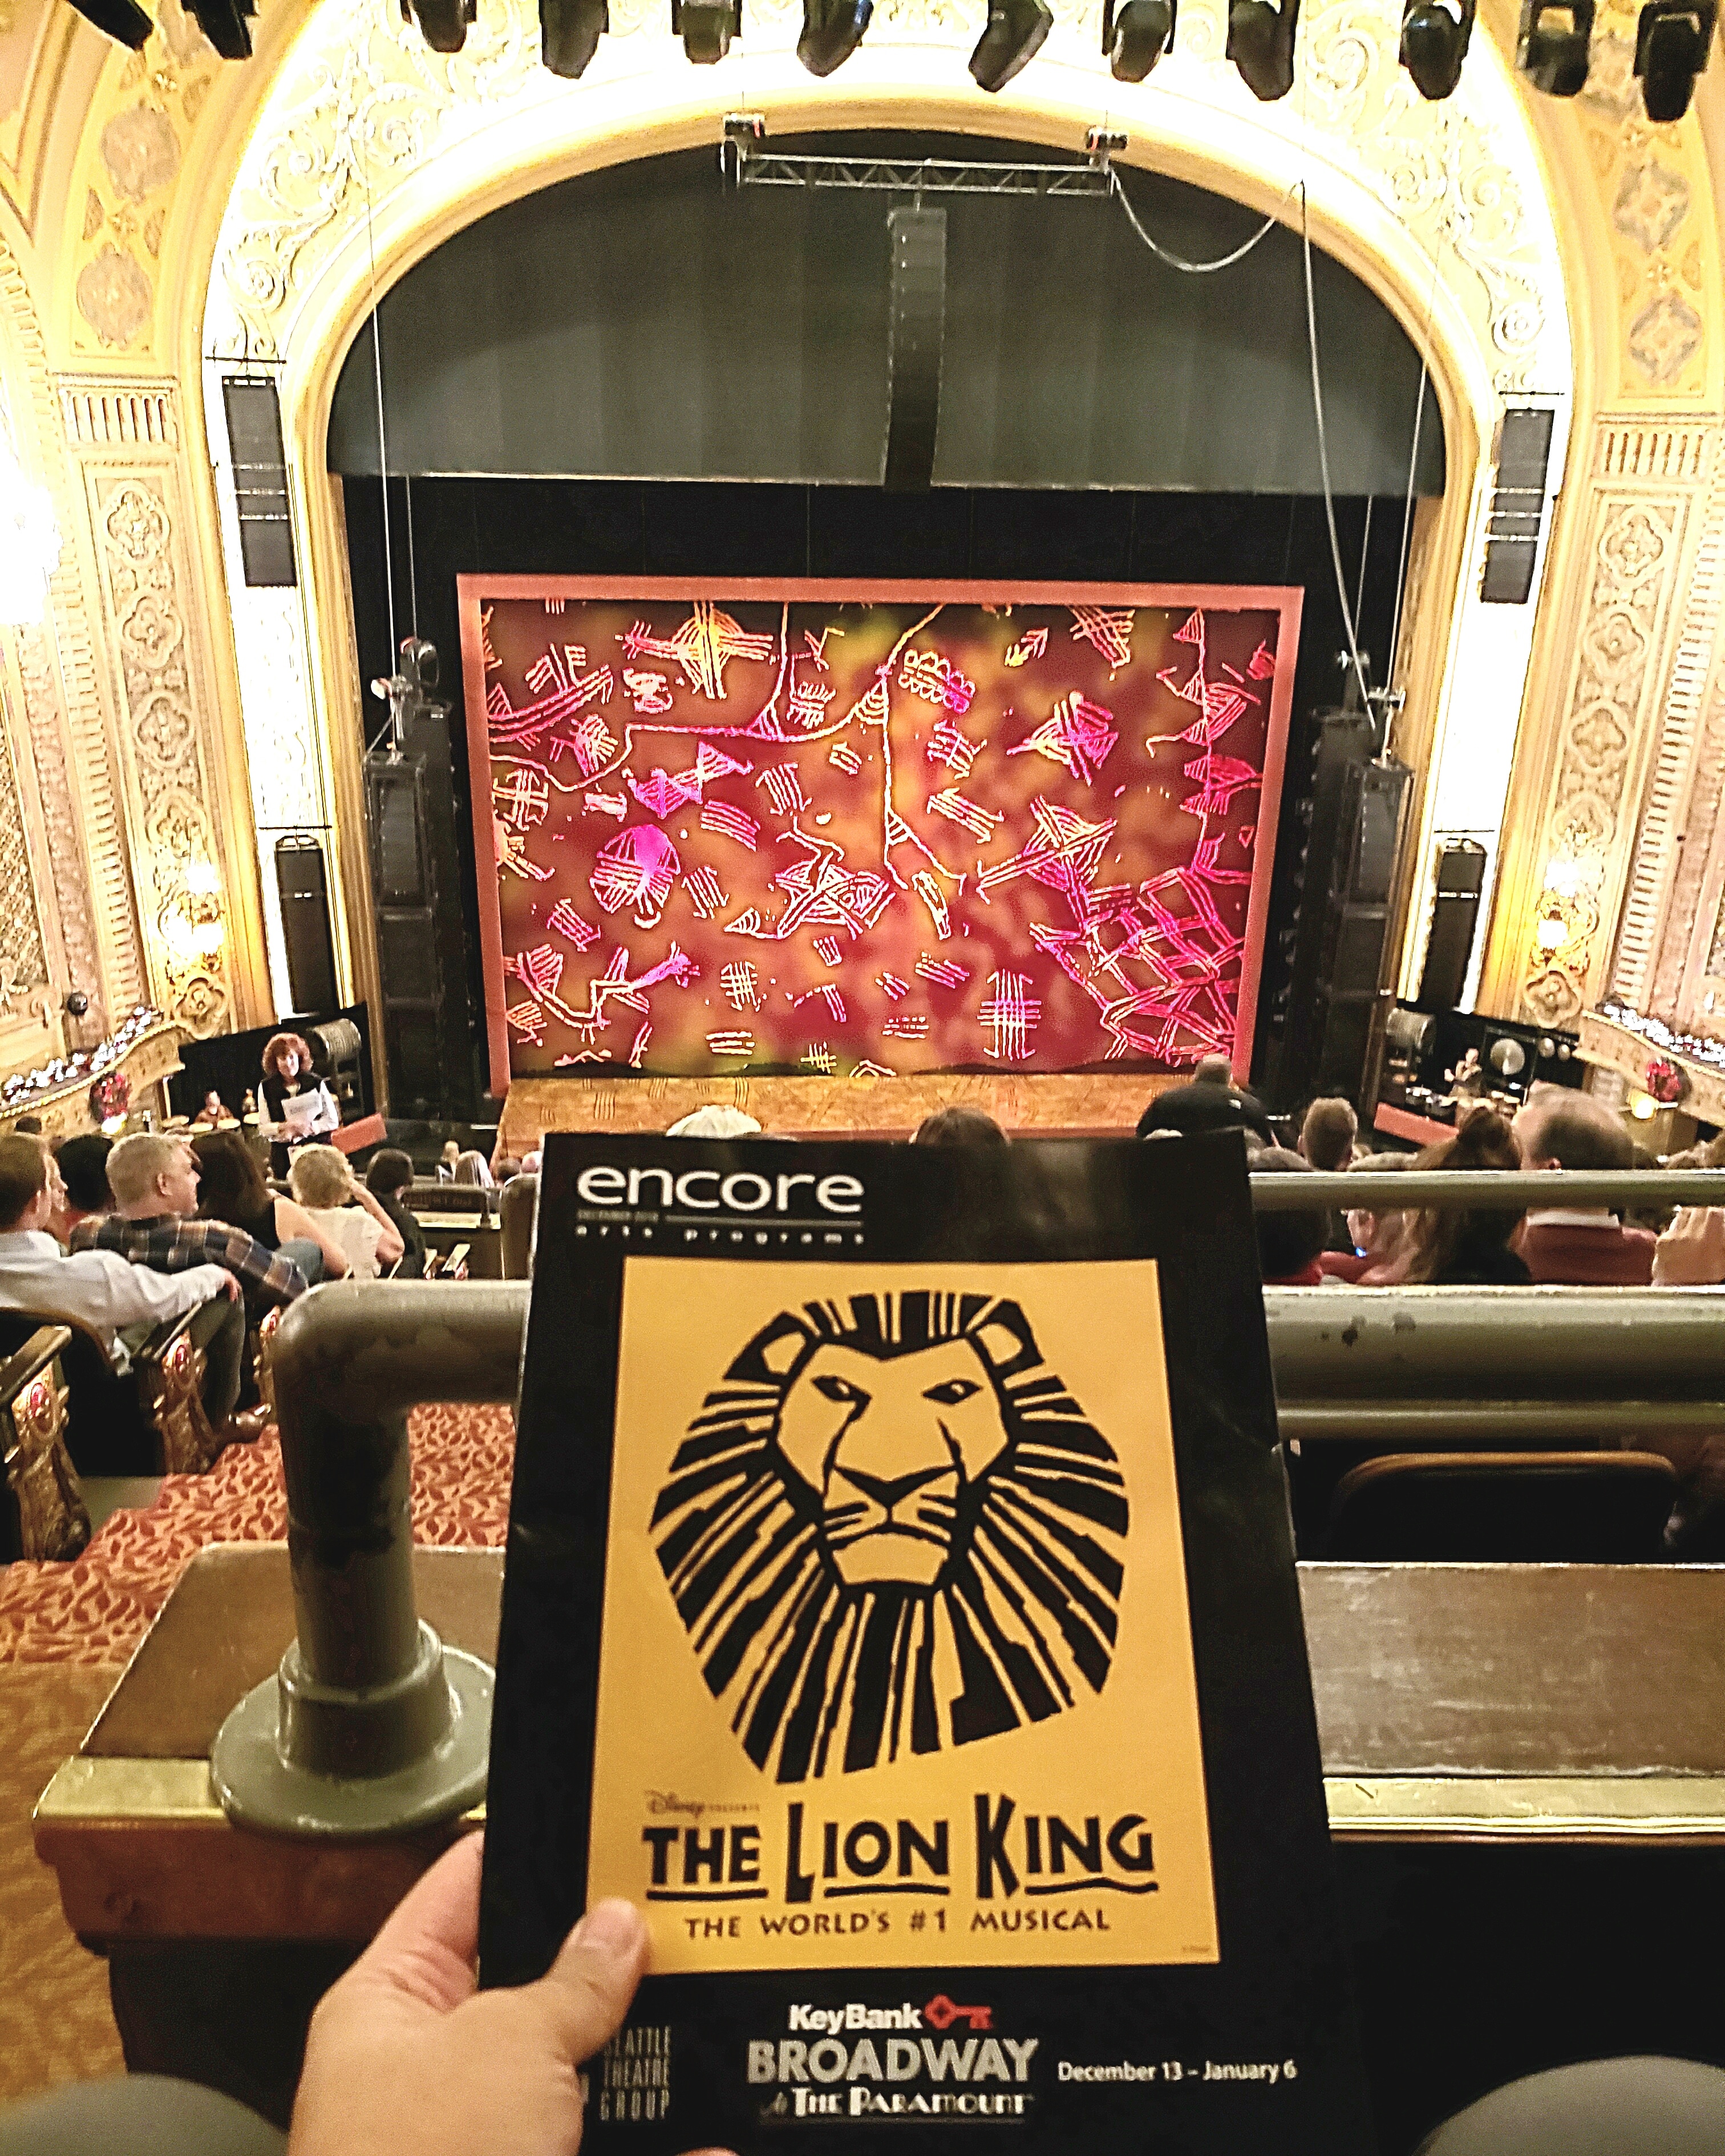 Disney's The Lion King - Musical #soldout run at Paramount Theatre. Costumes, set, & music were #AMAZING but show didn't live up to the #hype. #Puppetry isn't a great stage medium & animals aren't good stage characters. Also too #kidfriendly. #circleoflife #hakunamatata